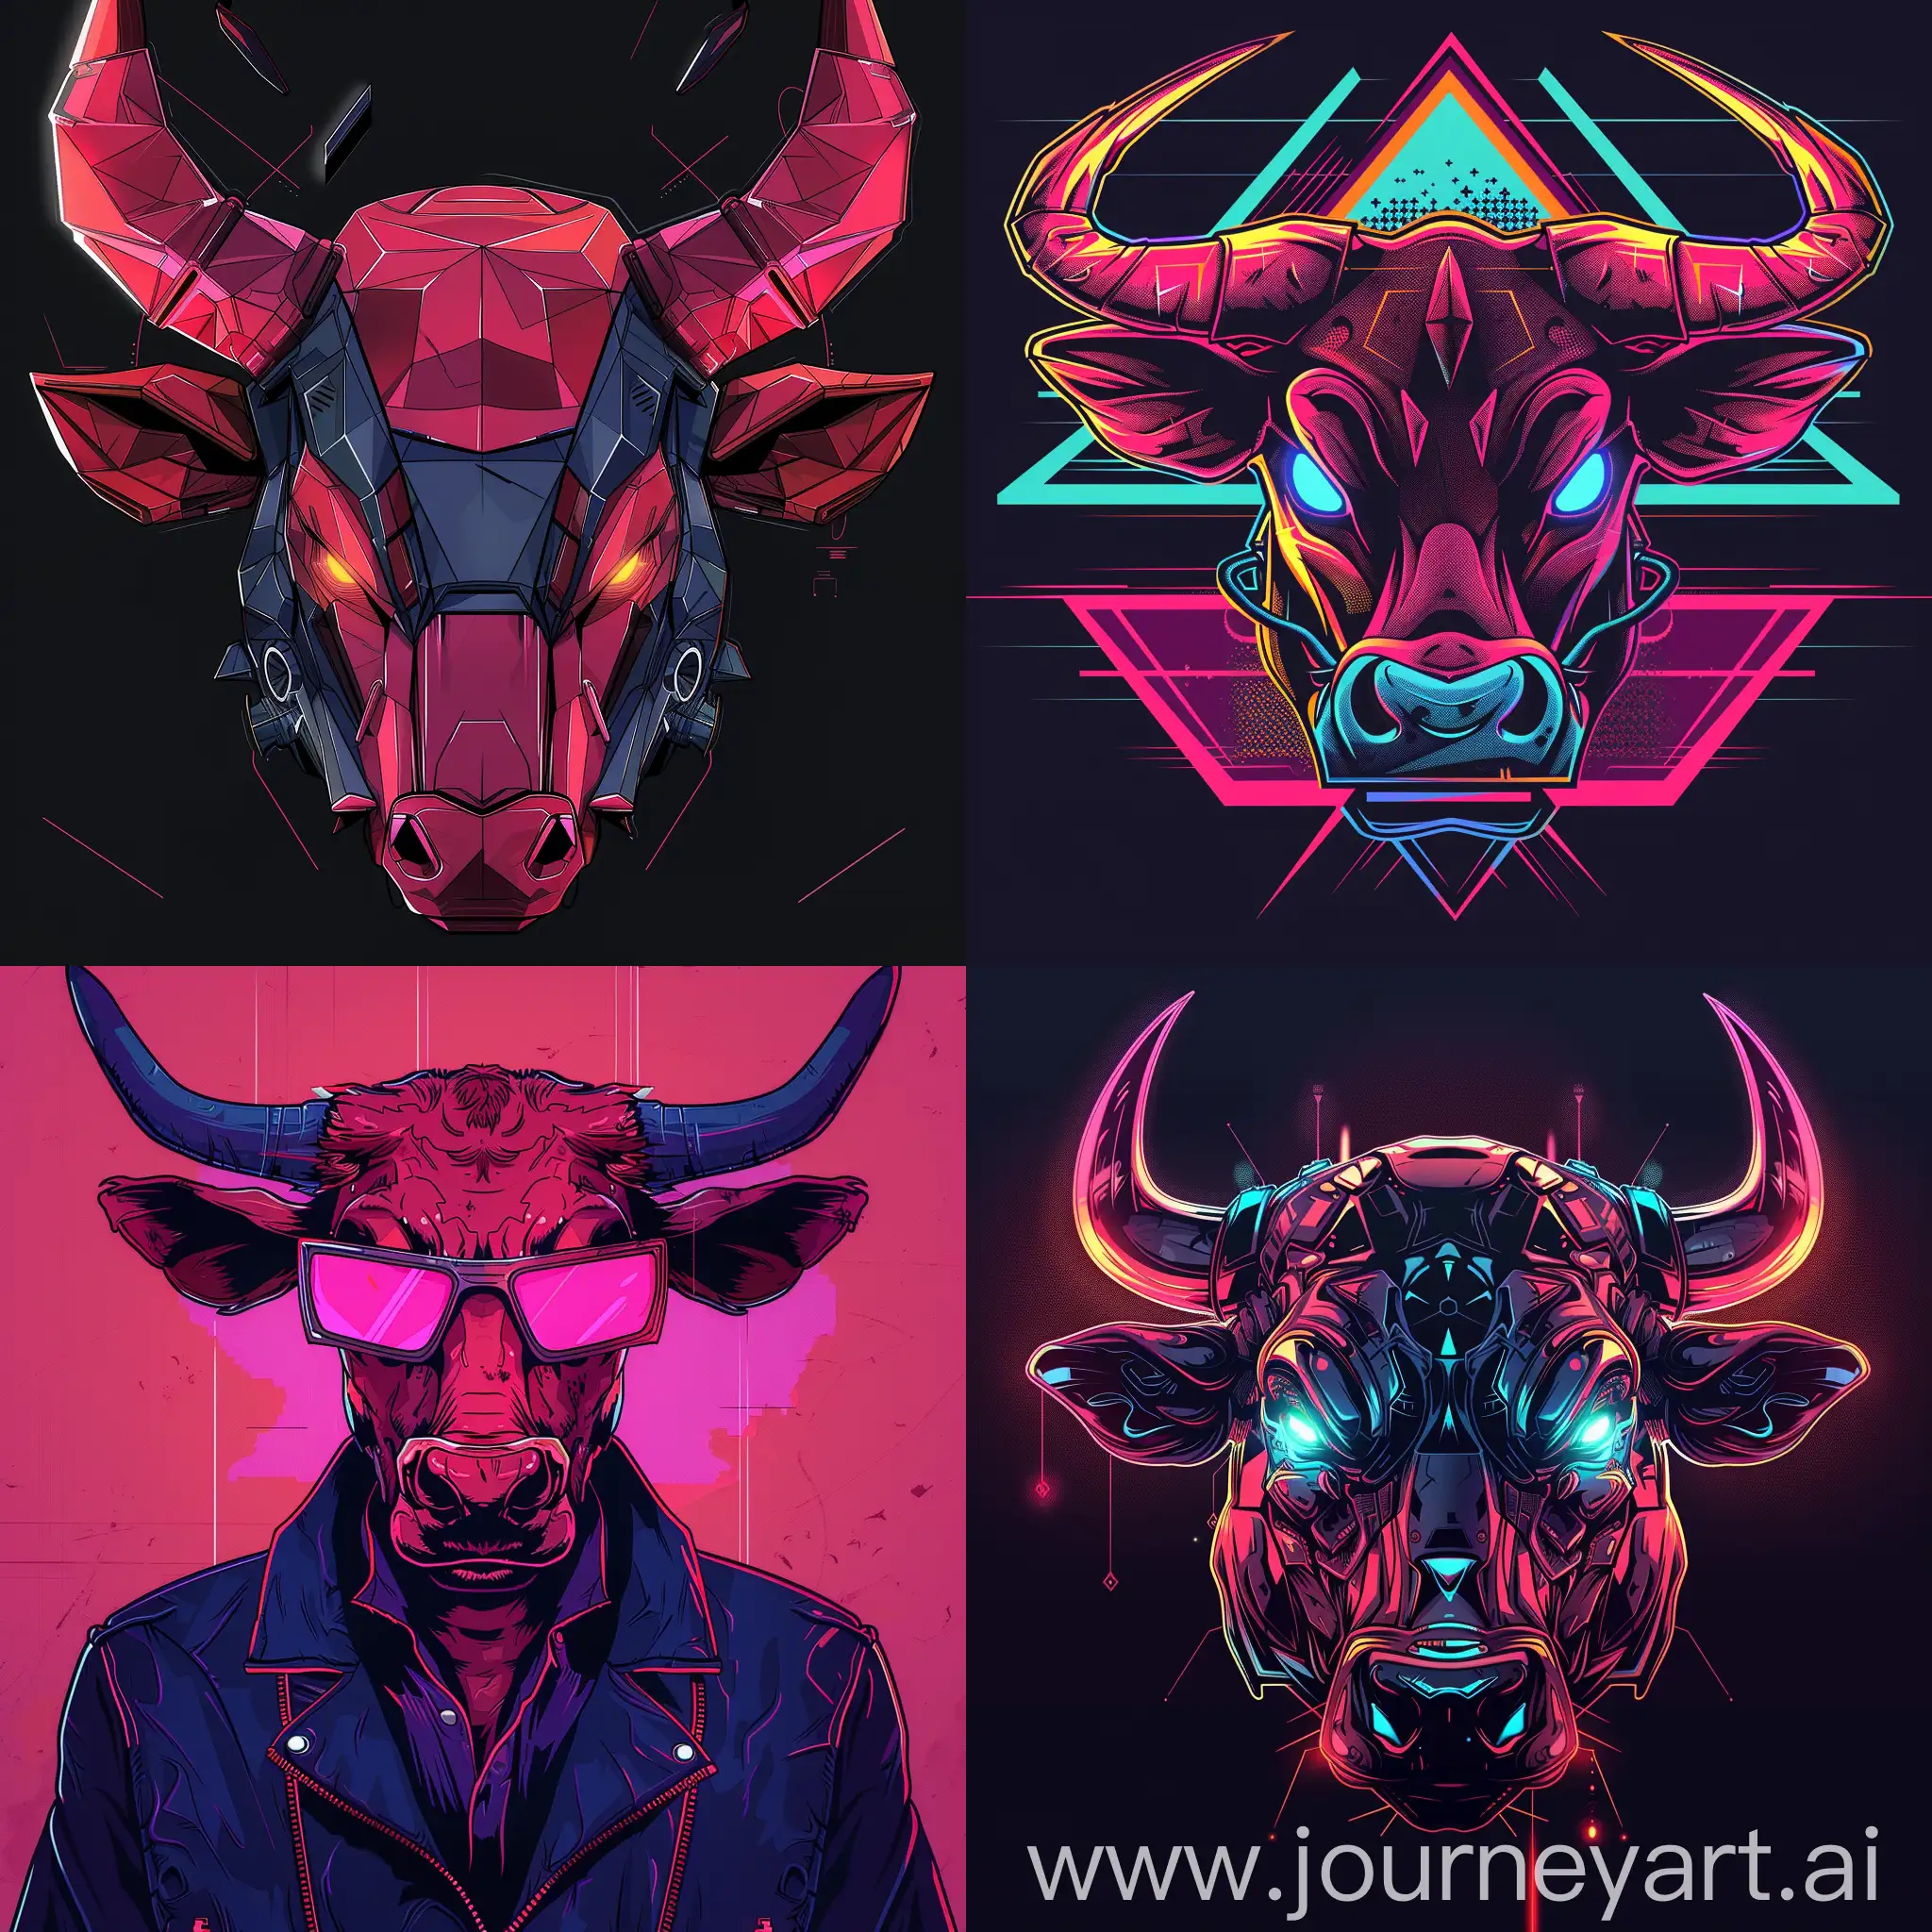 Synthwave-Red-Bull-Avatar-Cybernetic-Creature-in-Futuristic-Landscape